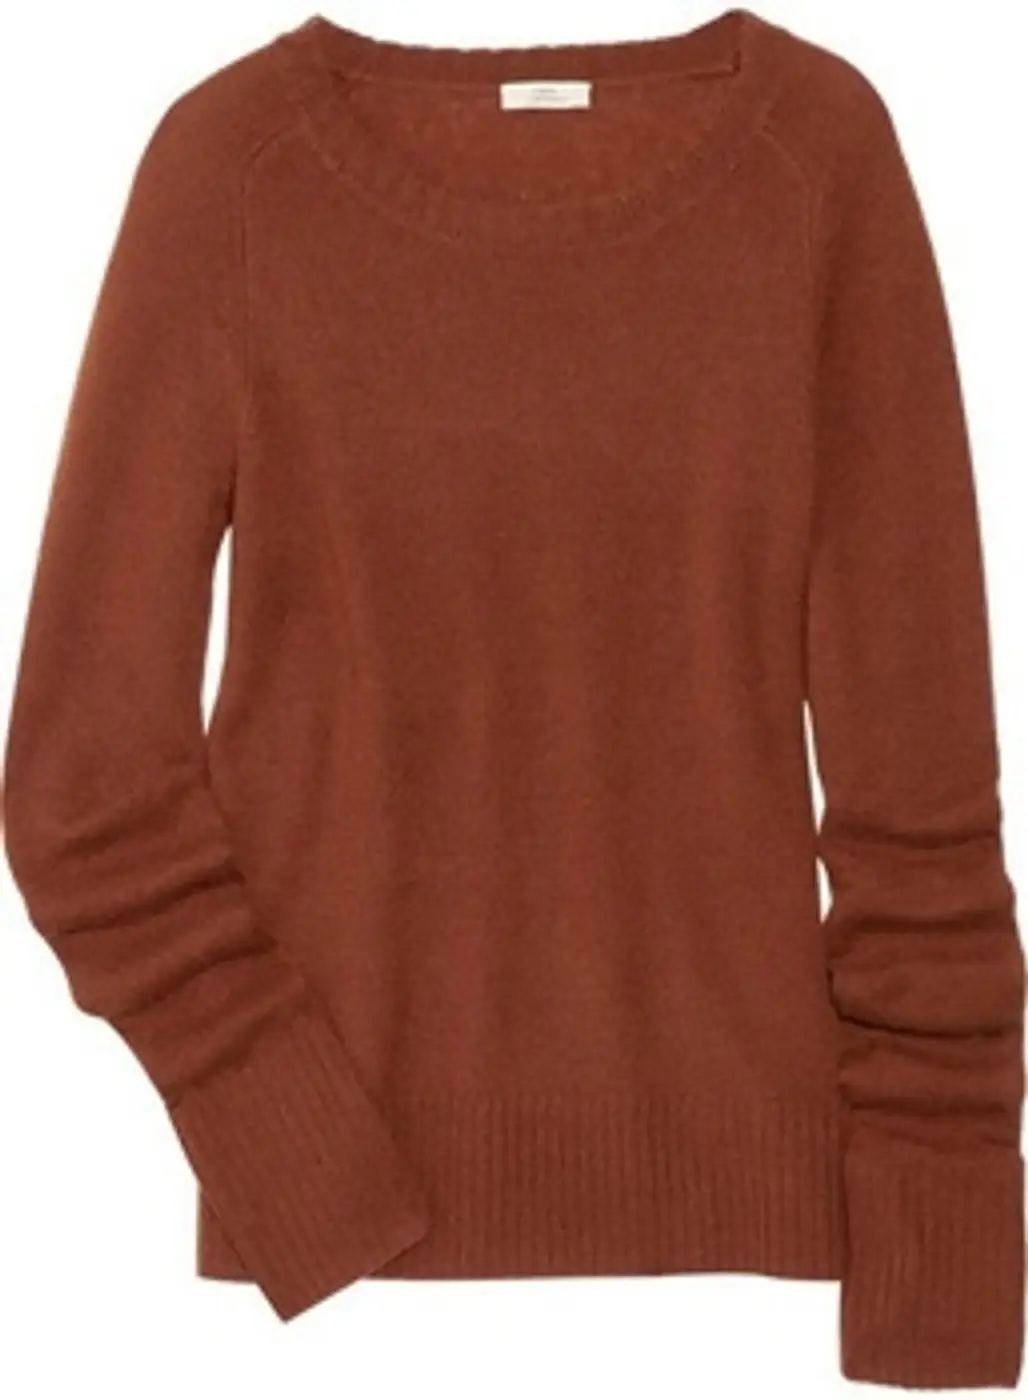 J.Crew Betsy Wool and Cashmere-Blend Sweater